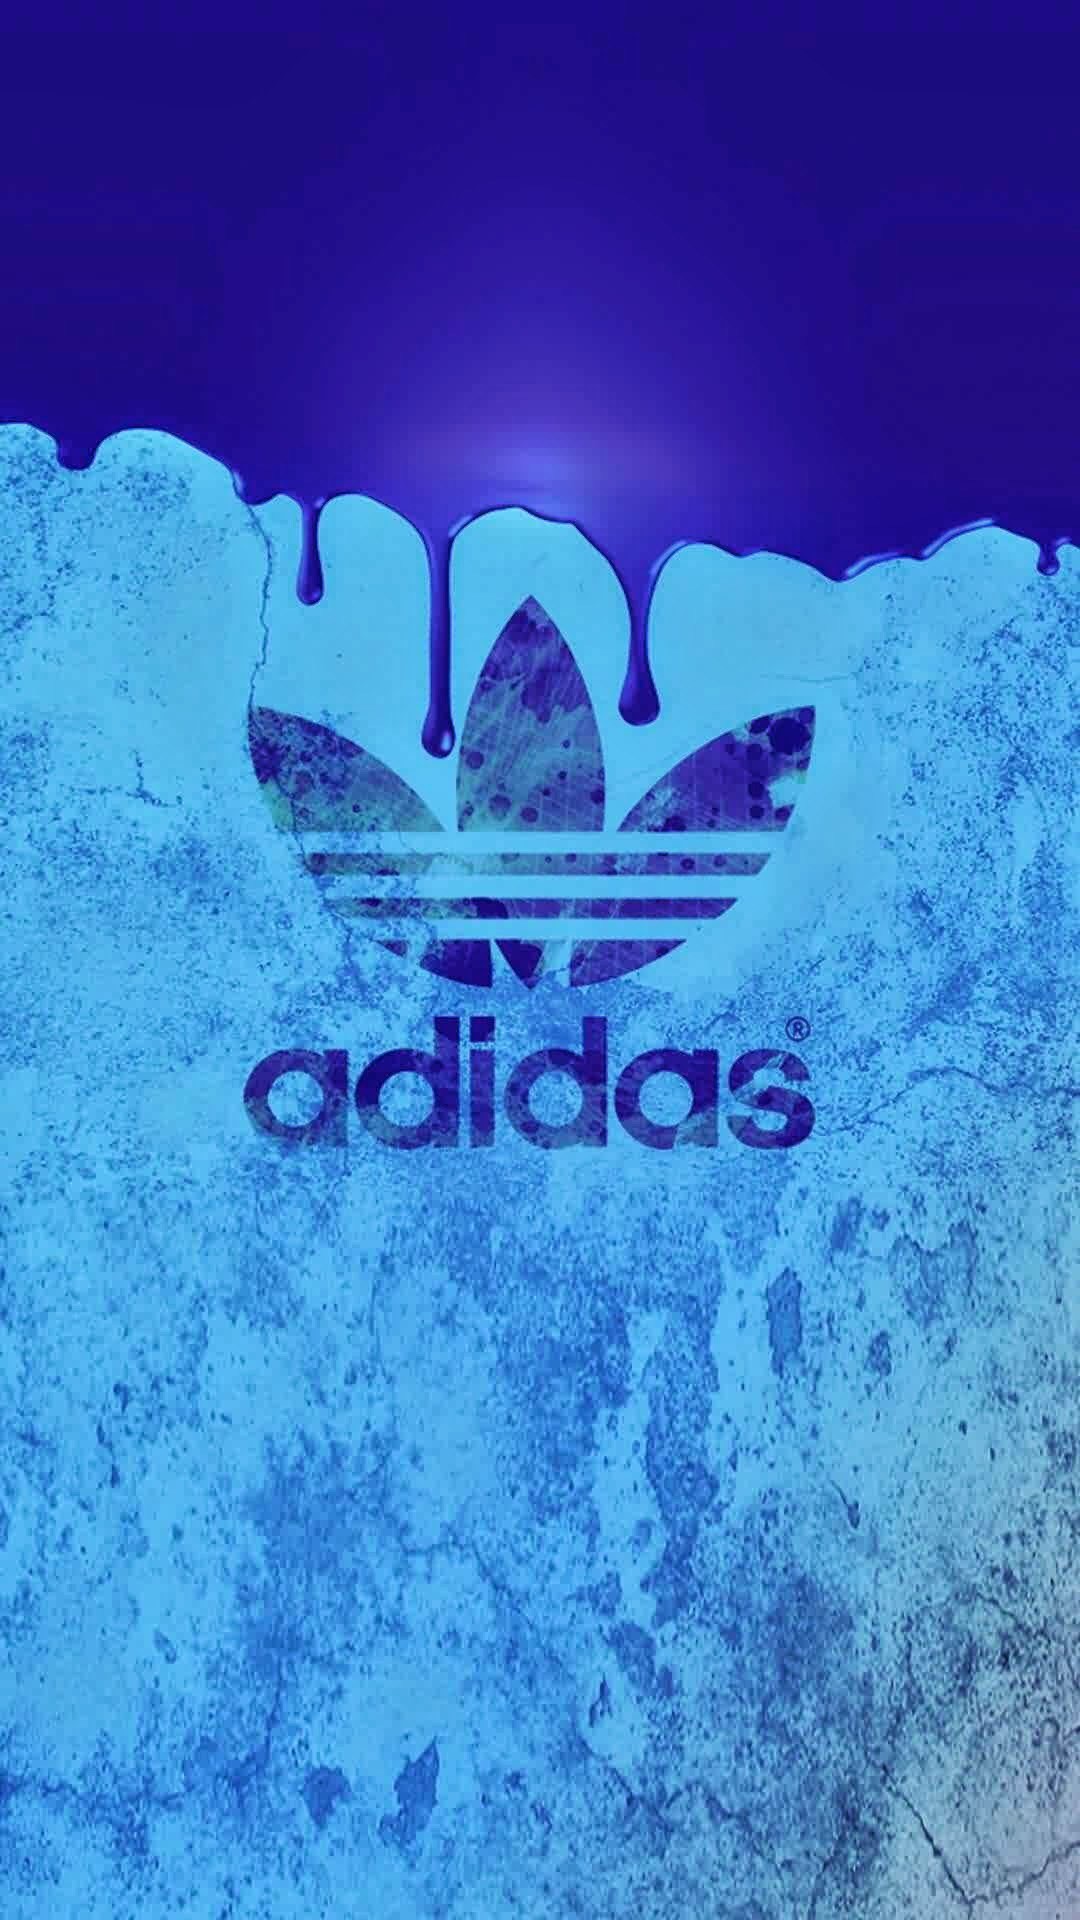 Wallpaper Android Adidas with high-resolution 1080x1920 pixel. You can use this wallpaper for your Android backgrounds, Tablet, Samsung Screensavers, Mobile Phone Lock Screen and another Smartphones device